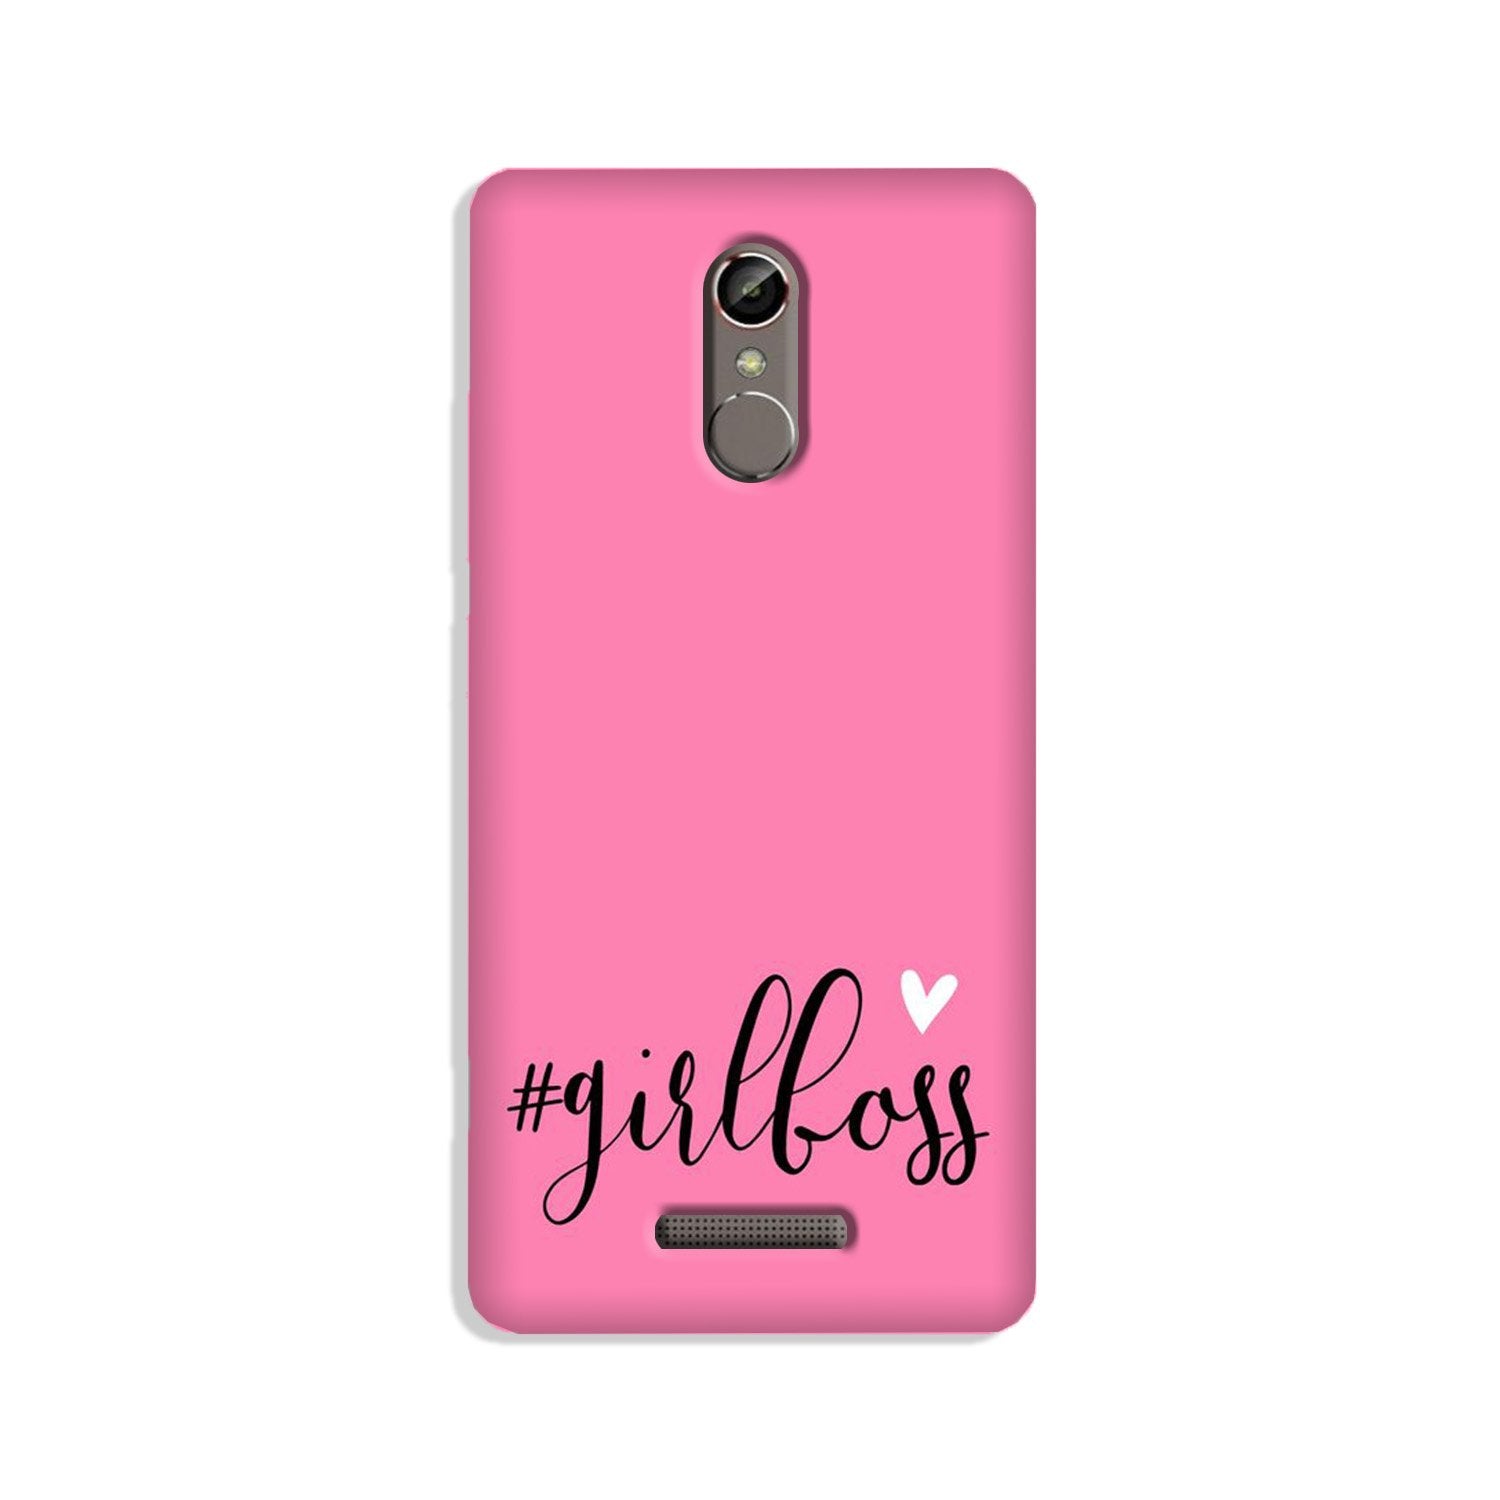 Girl Boss Pink Case for Gionee S6s (Design No. 269)